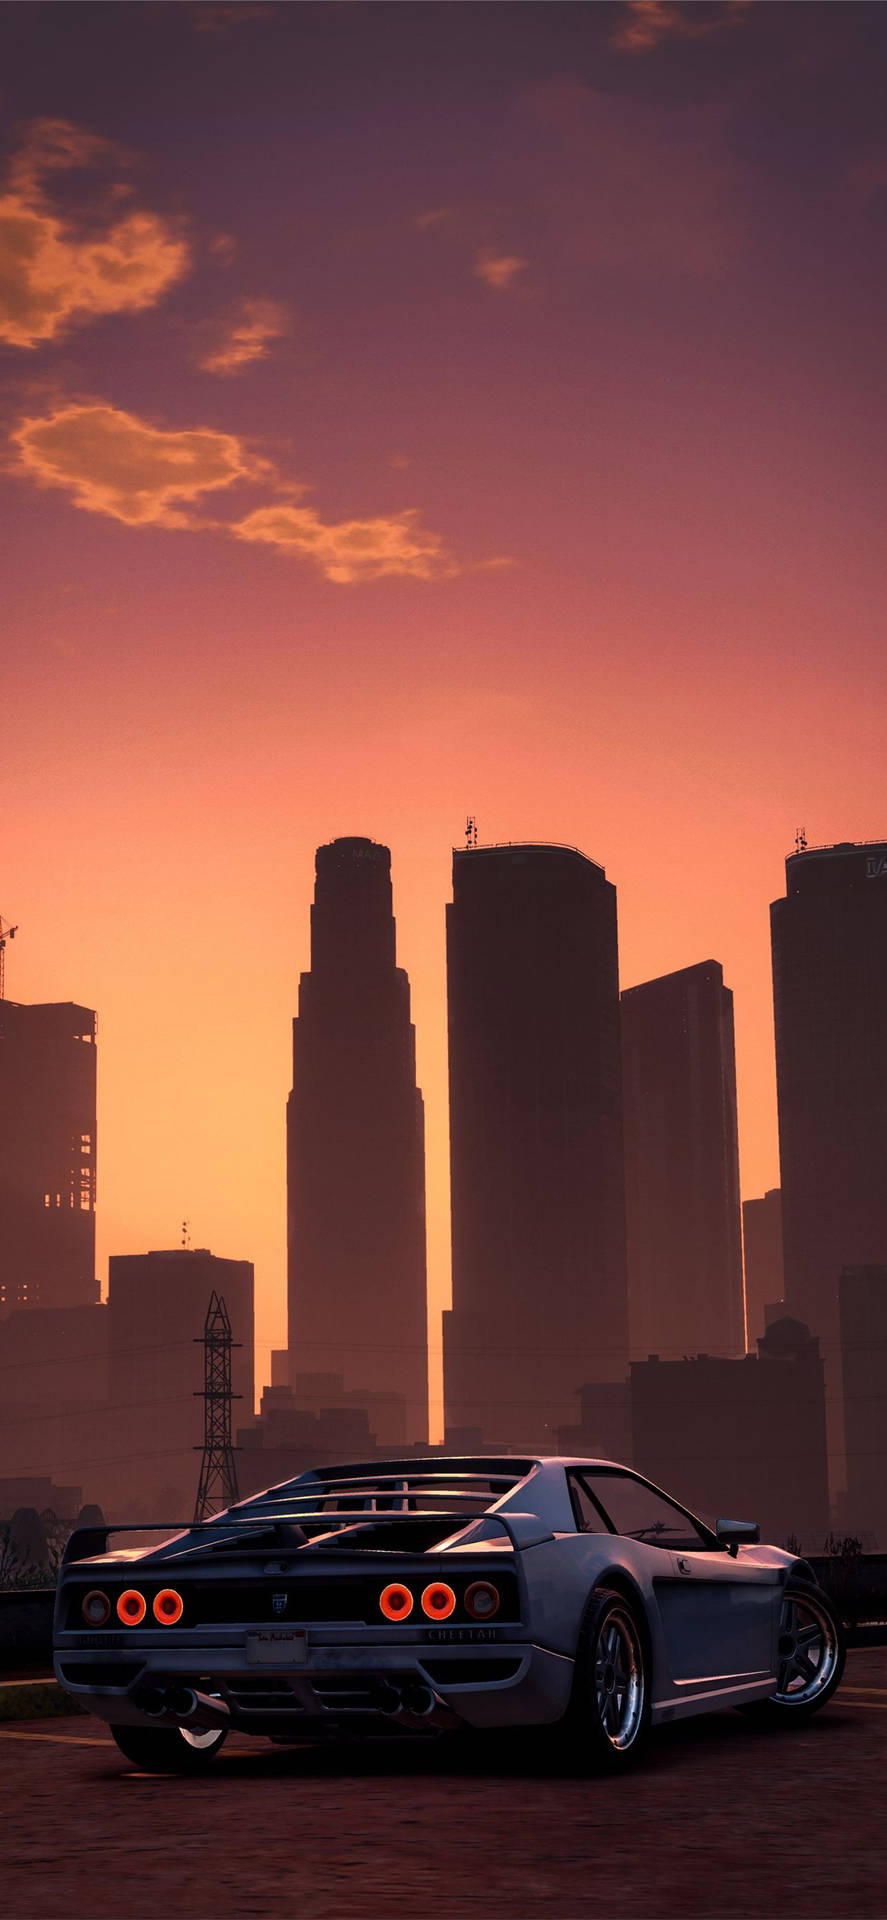 Cruise the City in Style With GTA 5 on Your Iphone Wallpaper